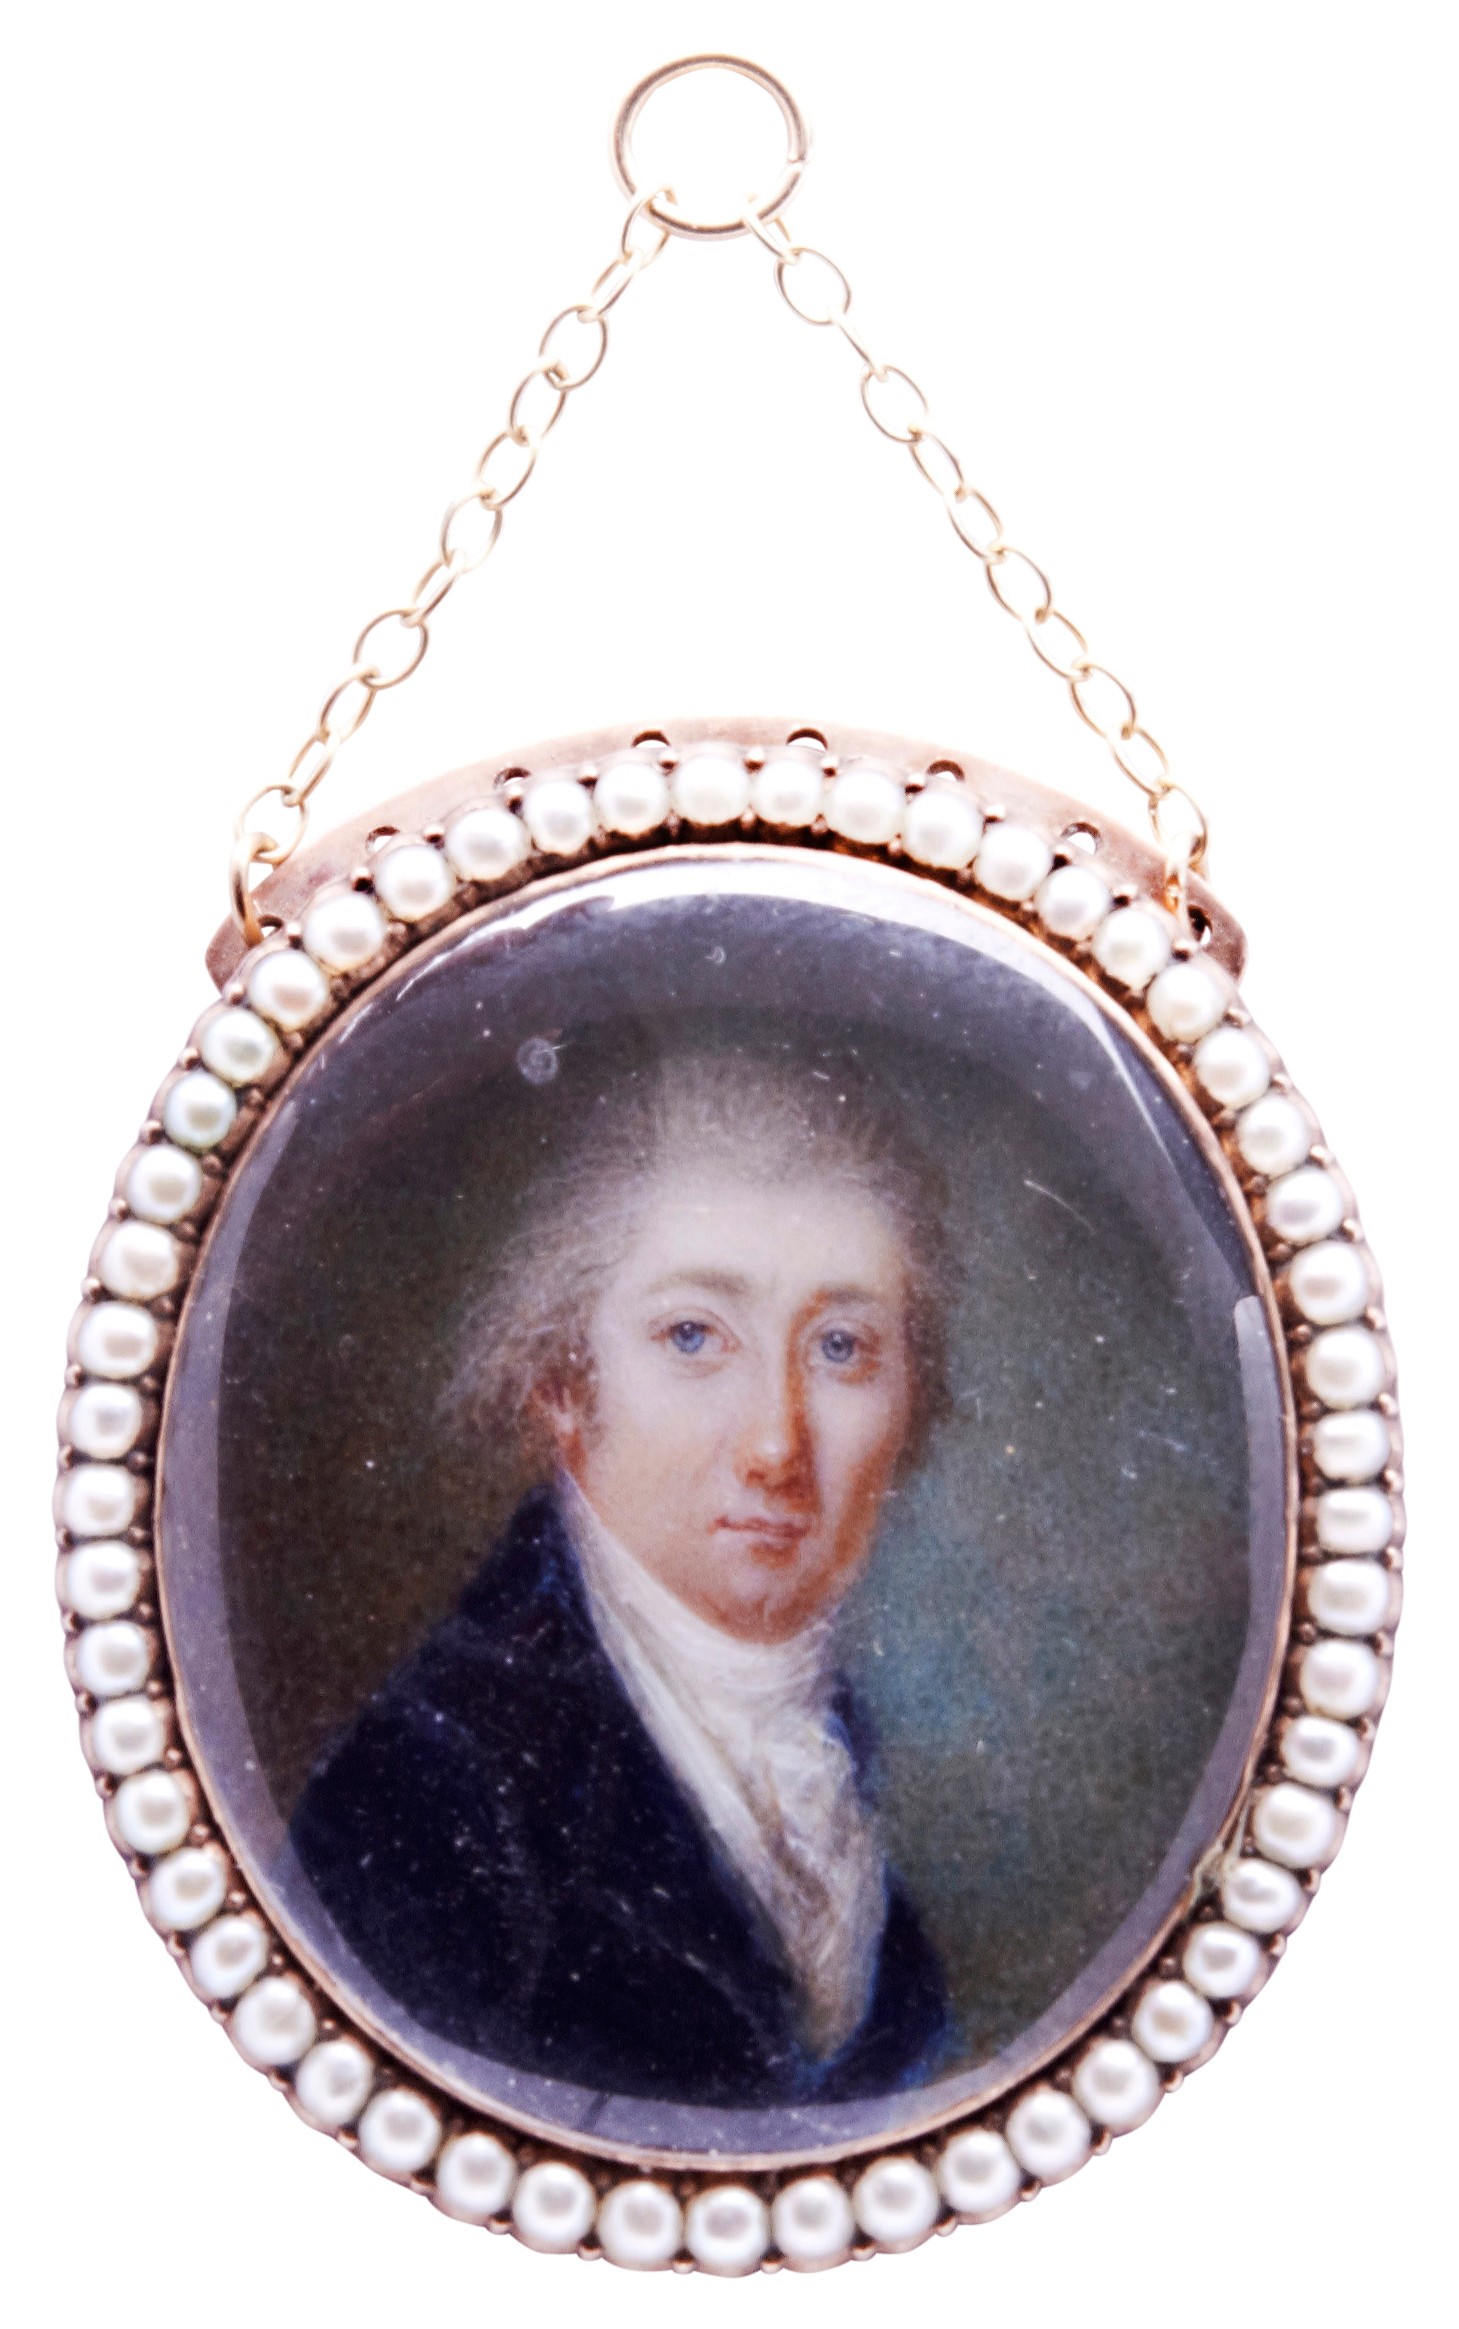 A LATE 18TH/EARLY 19TH CENTURY MINIATURE PORTRAIT OF GENTLEMAN, ENGLISH SCHOOL, set in a yellow